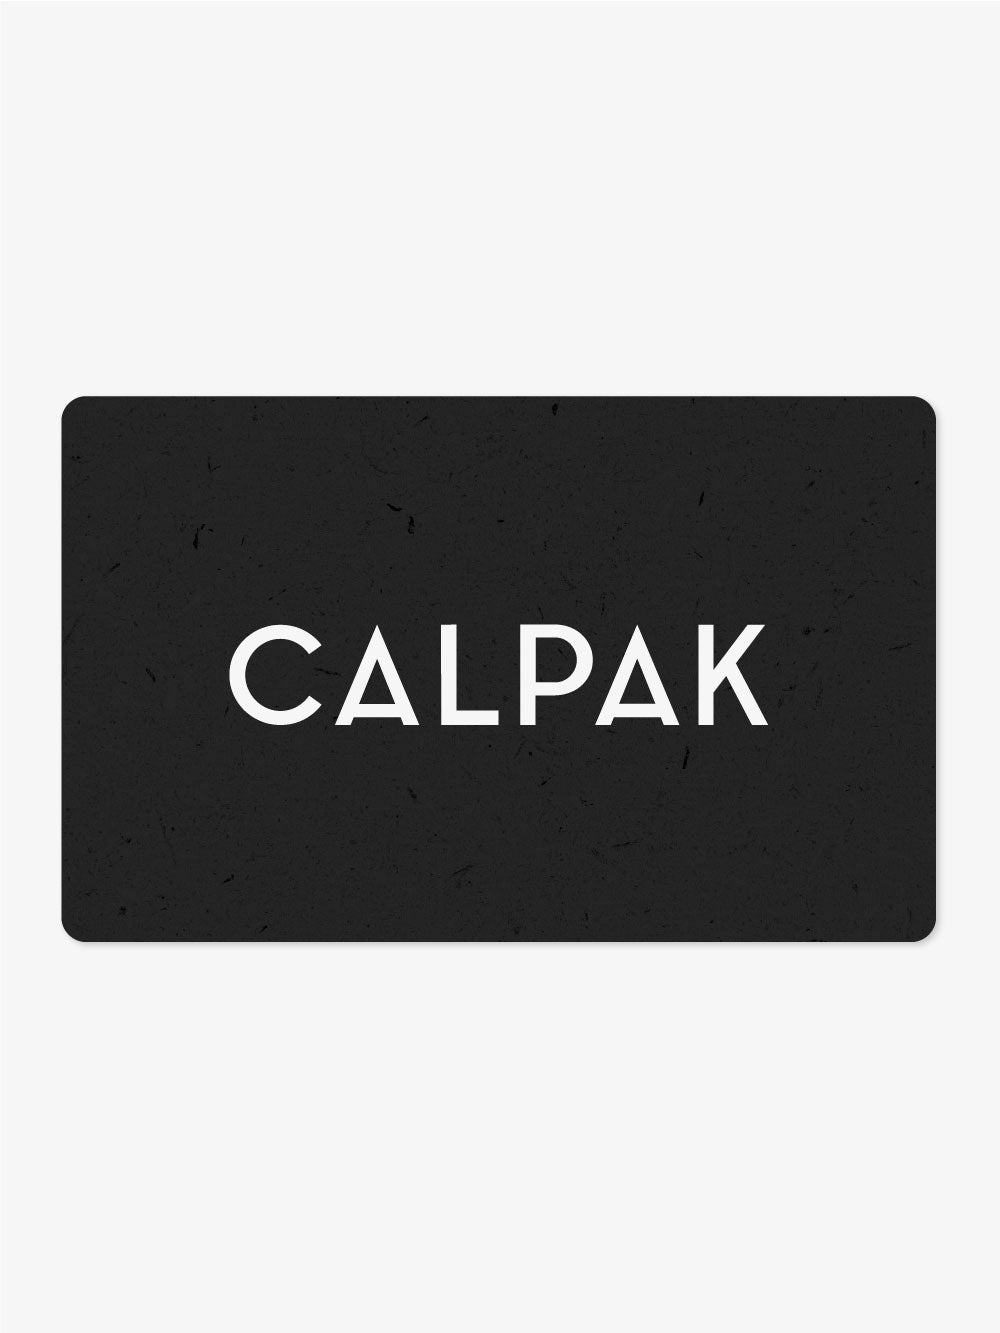 CALPAK digital gift card for luggage, bags and travel accessories